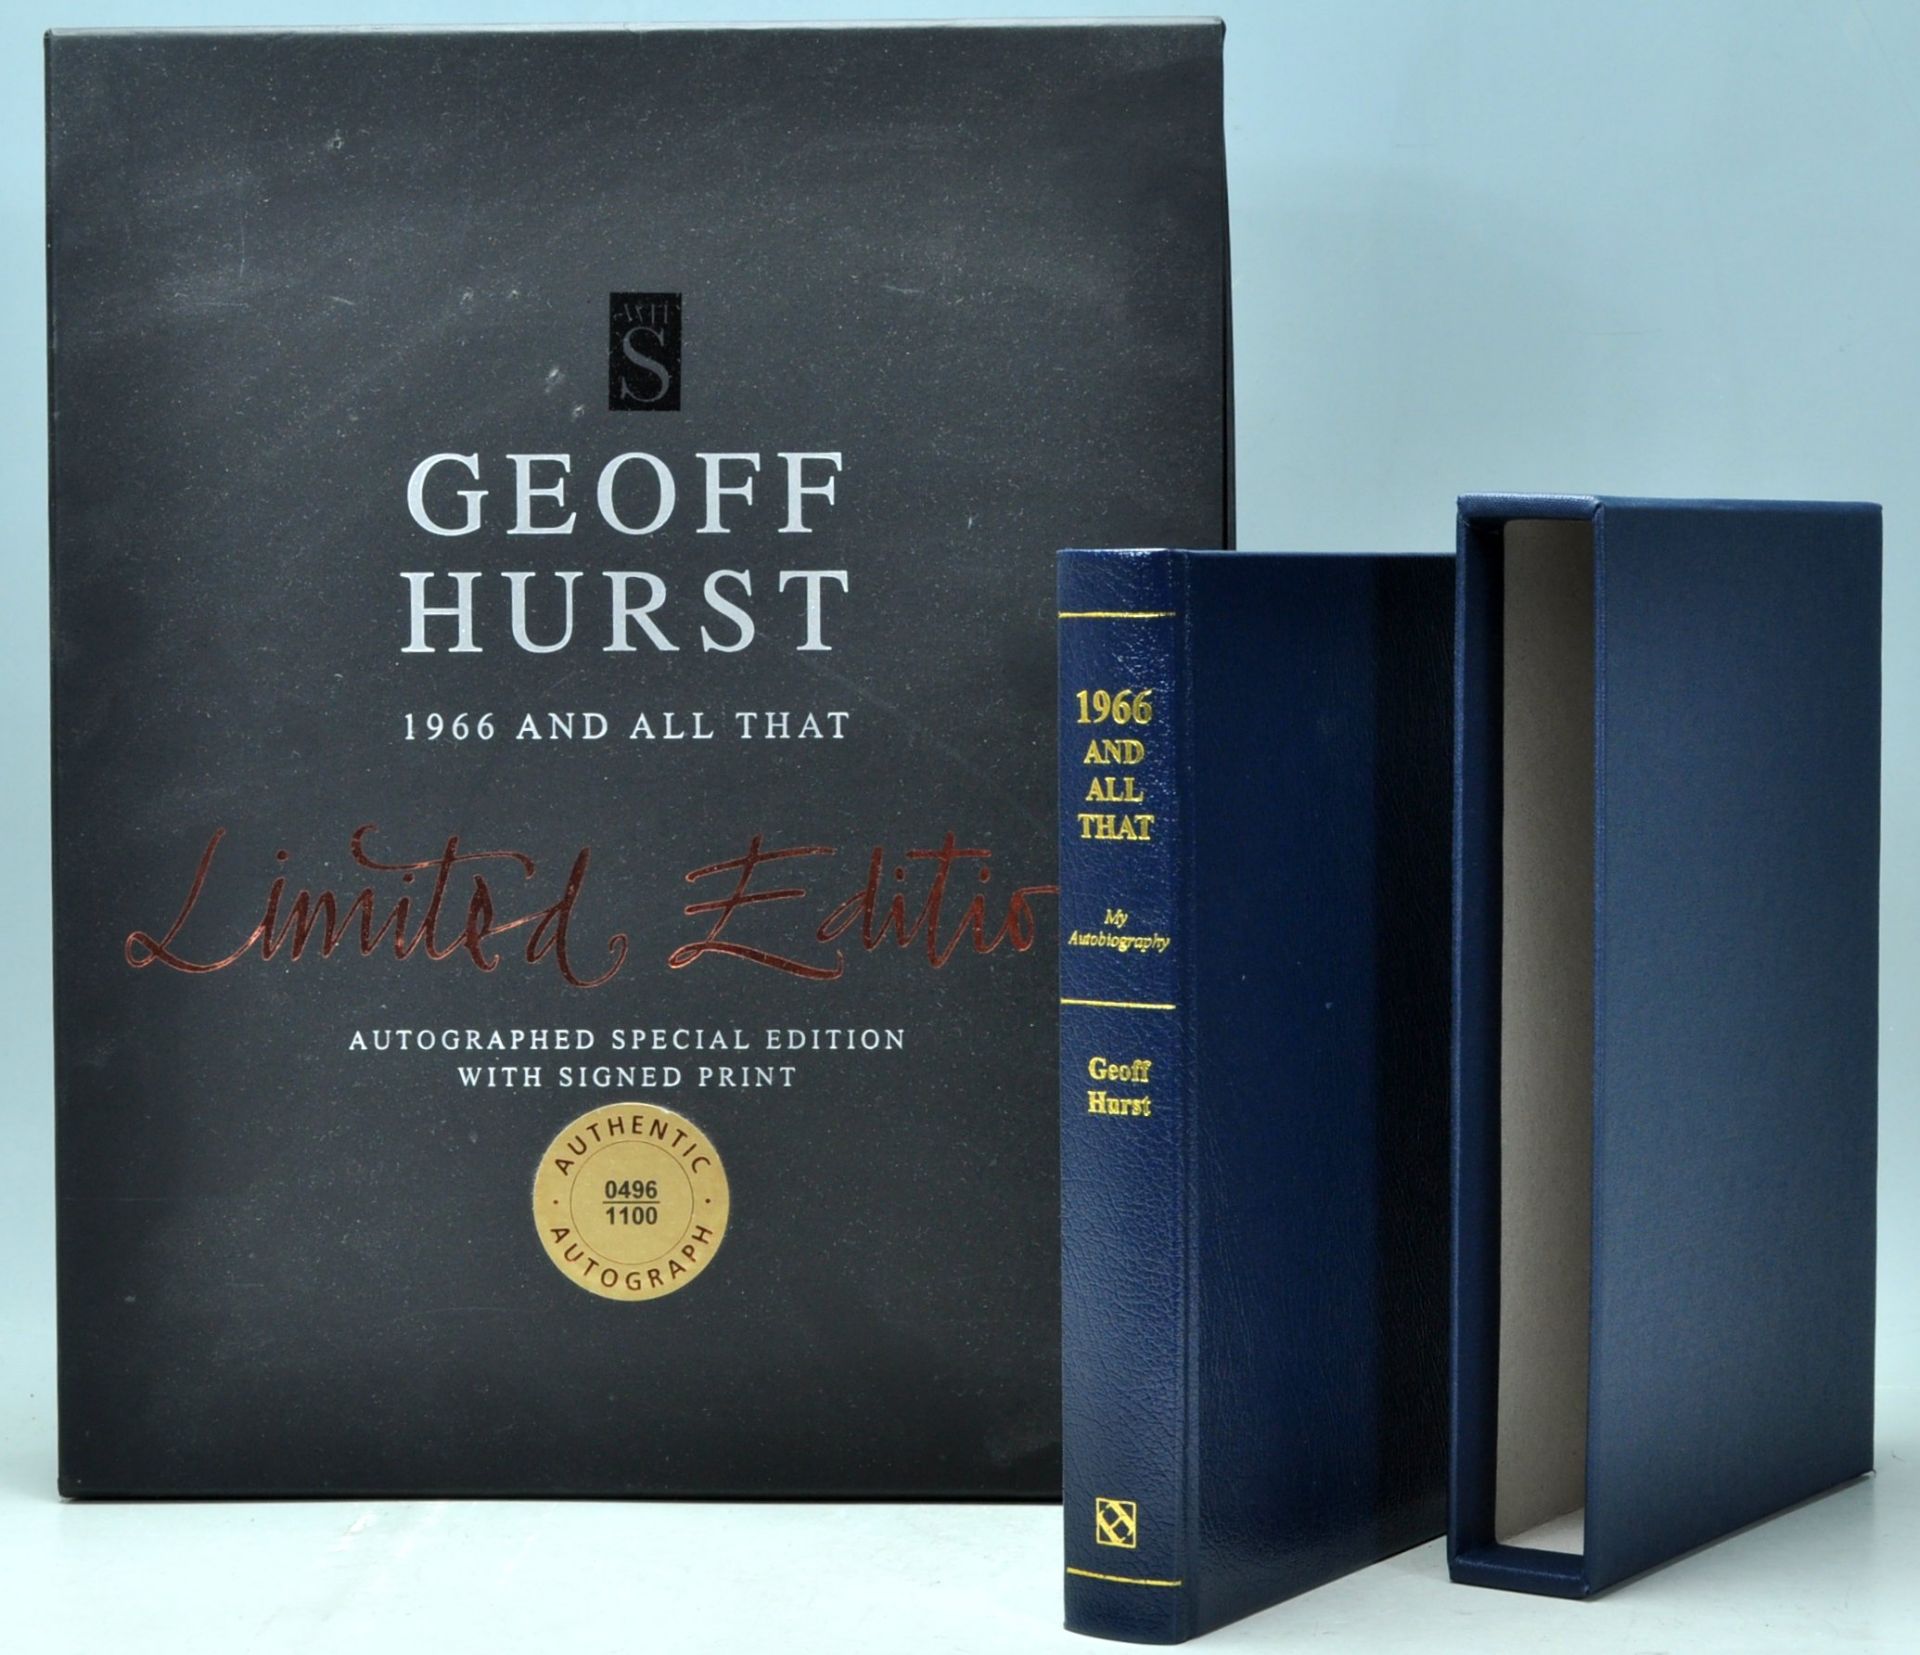 Geoff Hurst Autobiography- 1966 And All That Limited Edition signed book within original outer